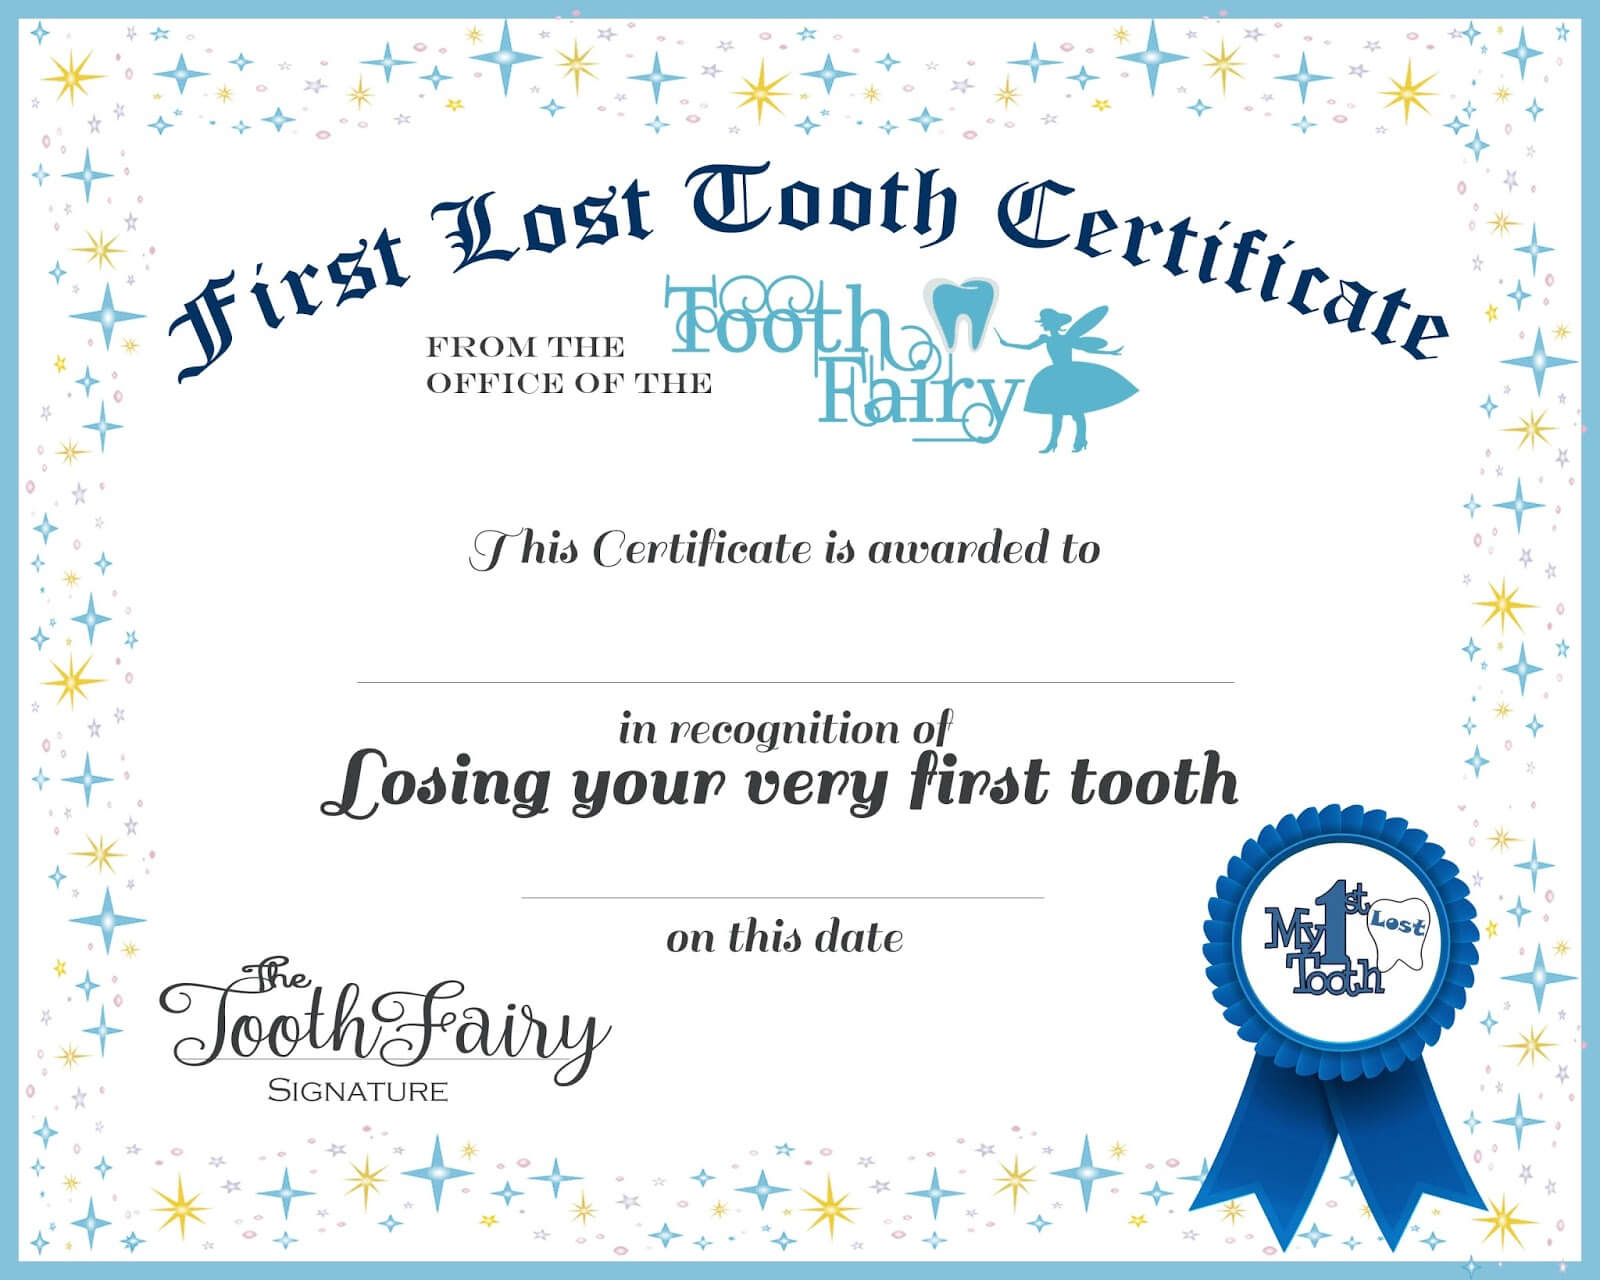 Easy Tooth Fairy Ideas & Tips For Parents / Free Printables Throughout Tooth Fairy Certificate Template Free